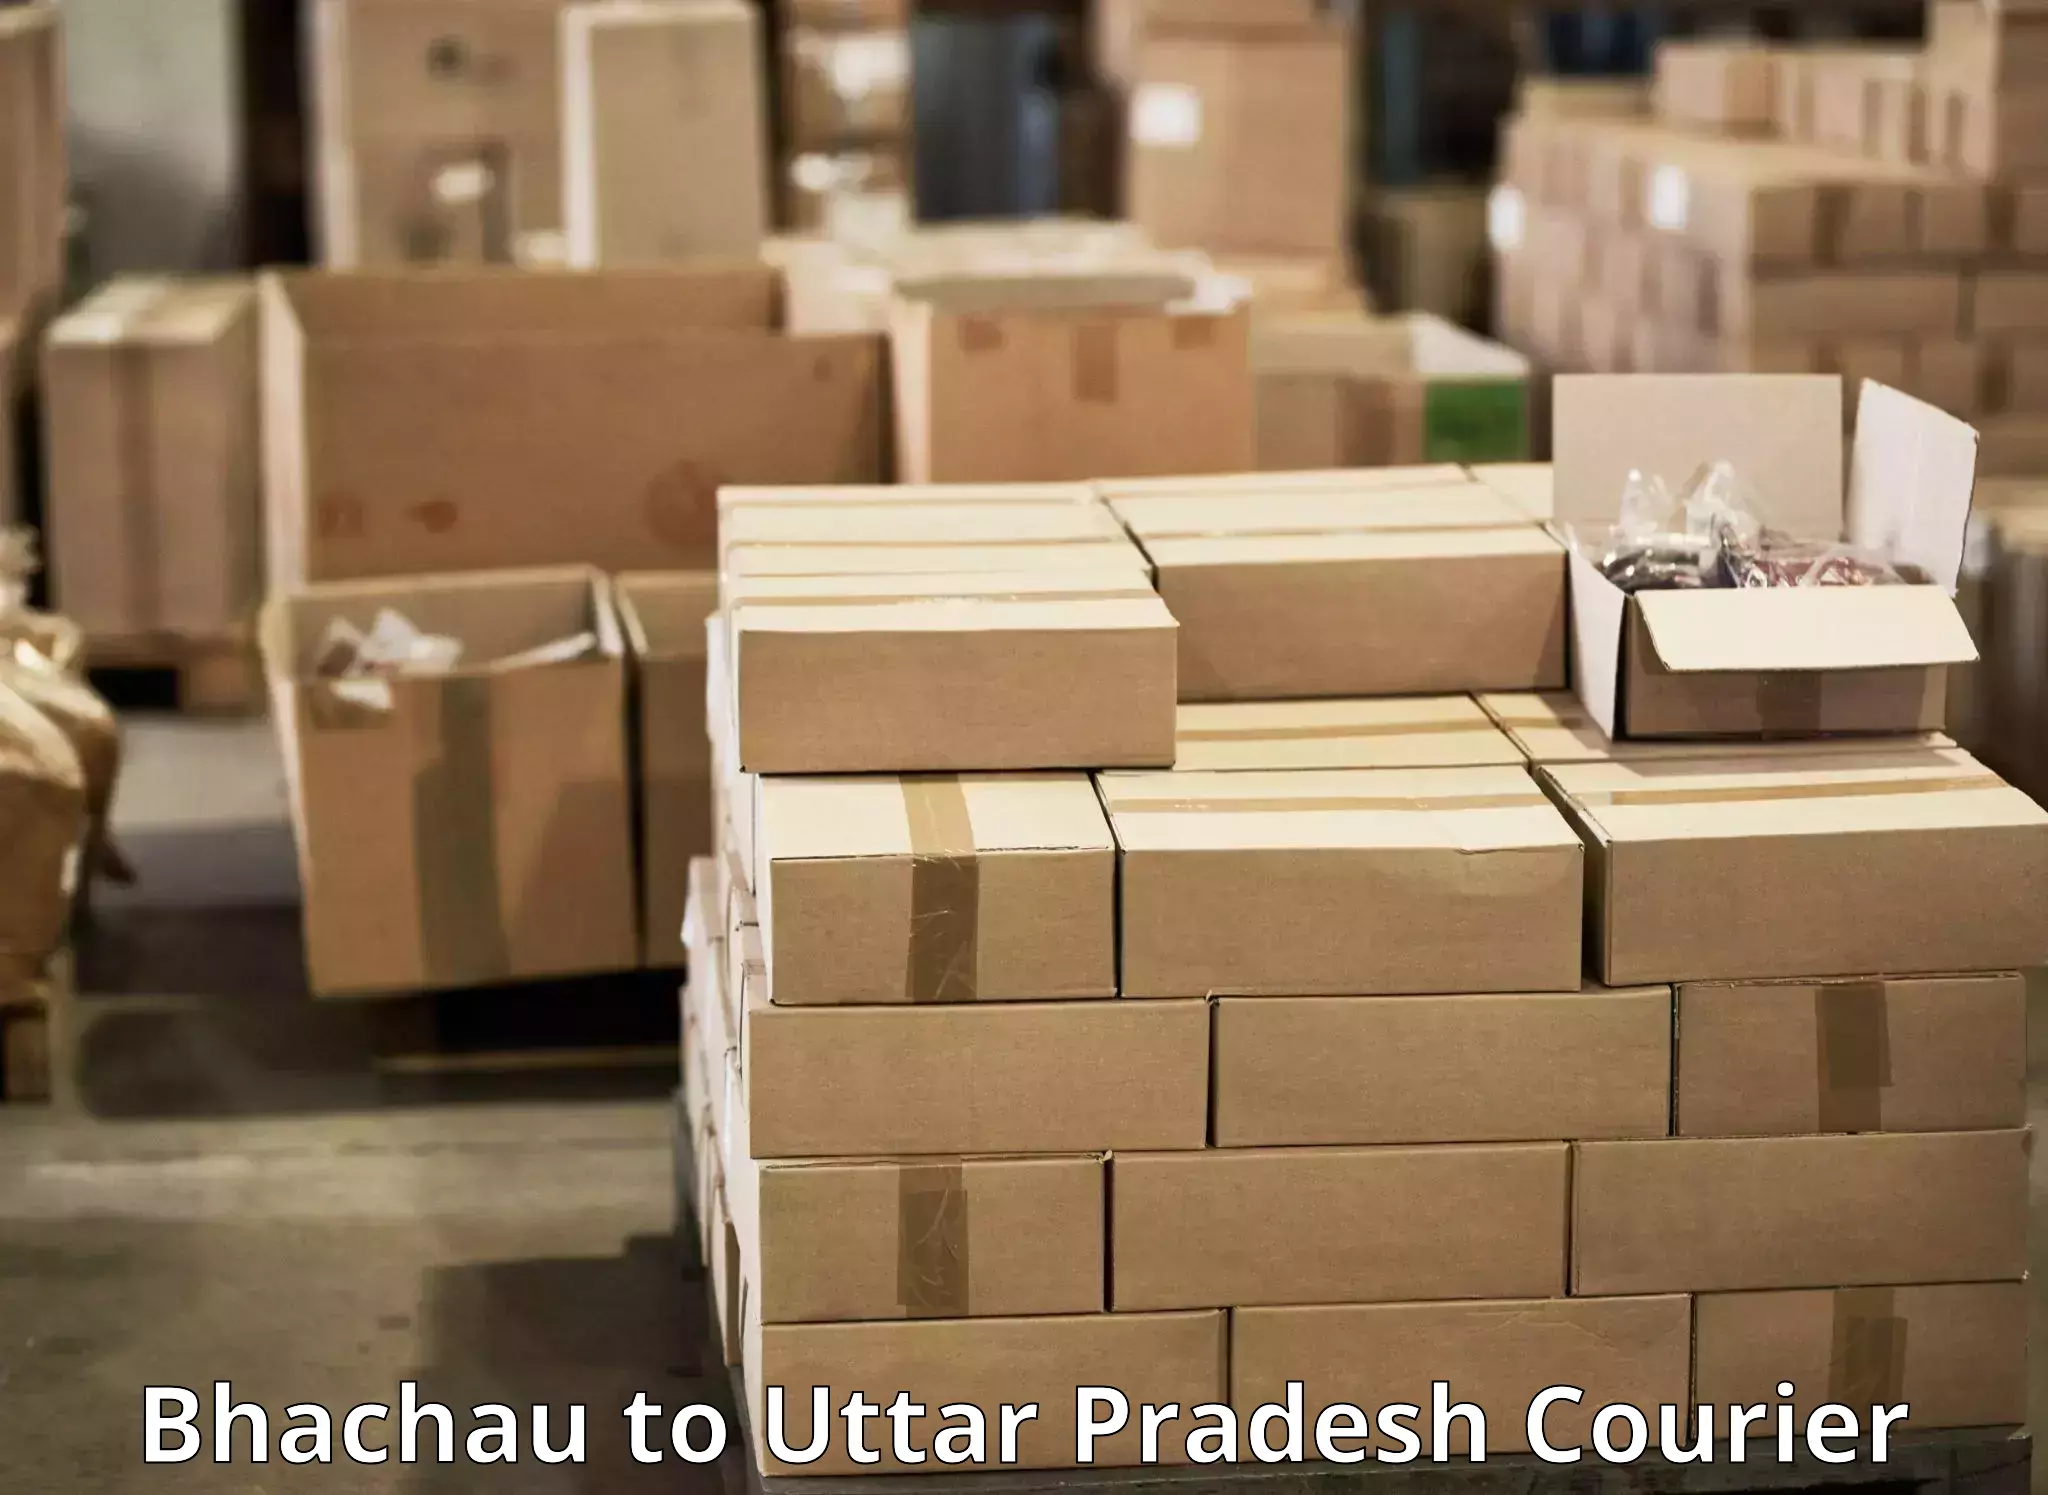 High-capacity courier solutions Bhachau to Agra